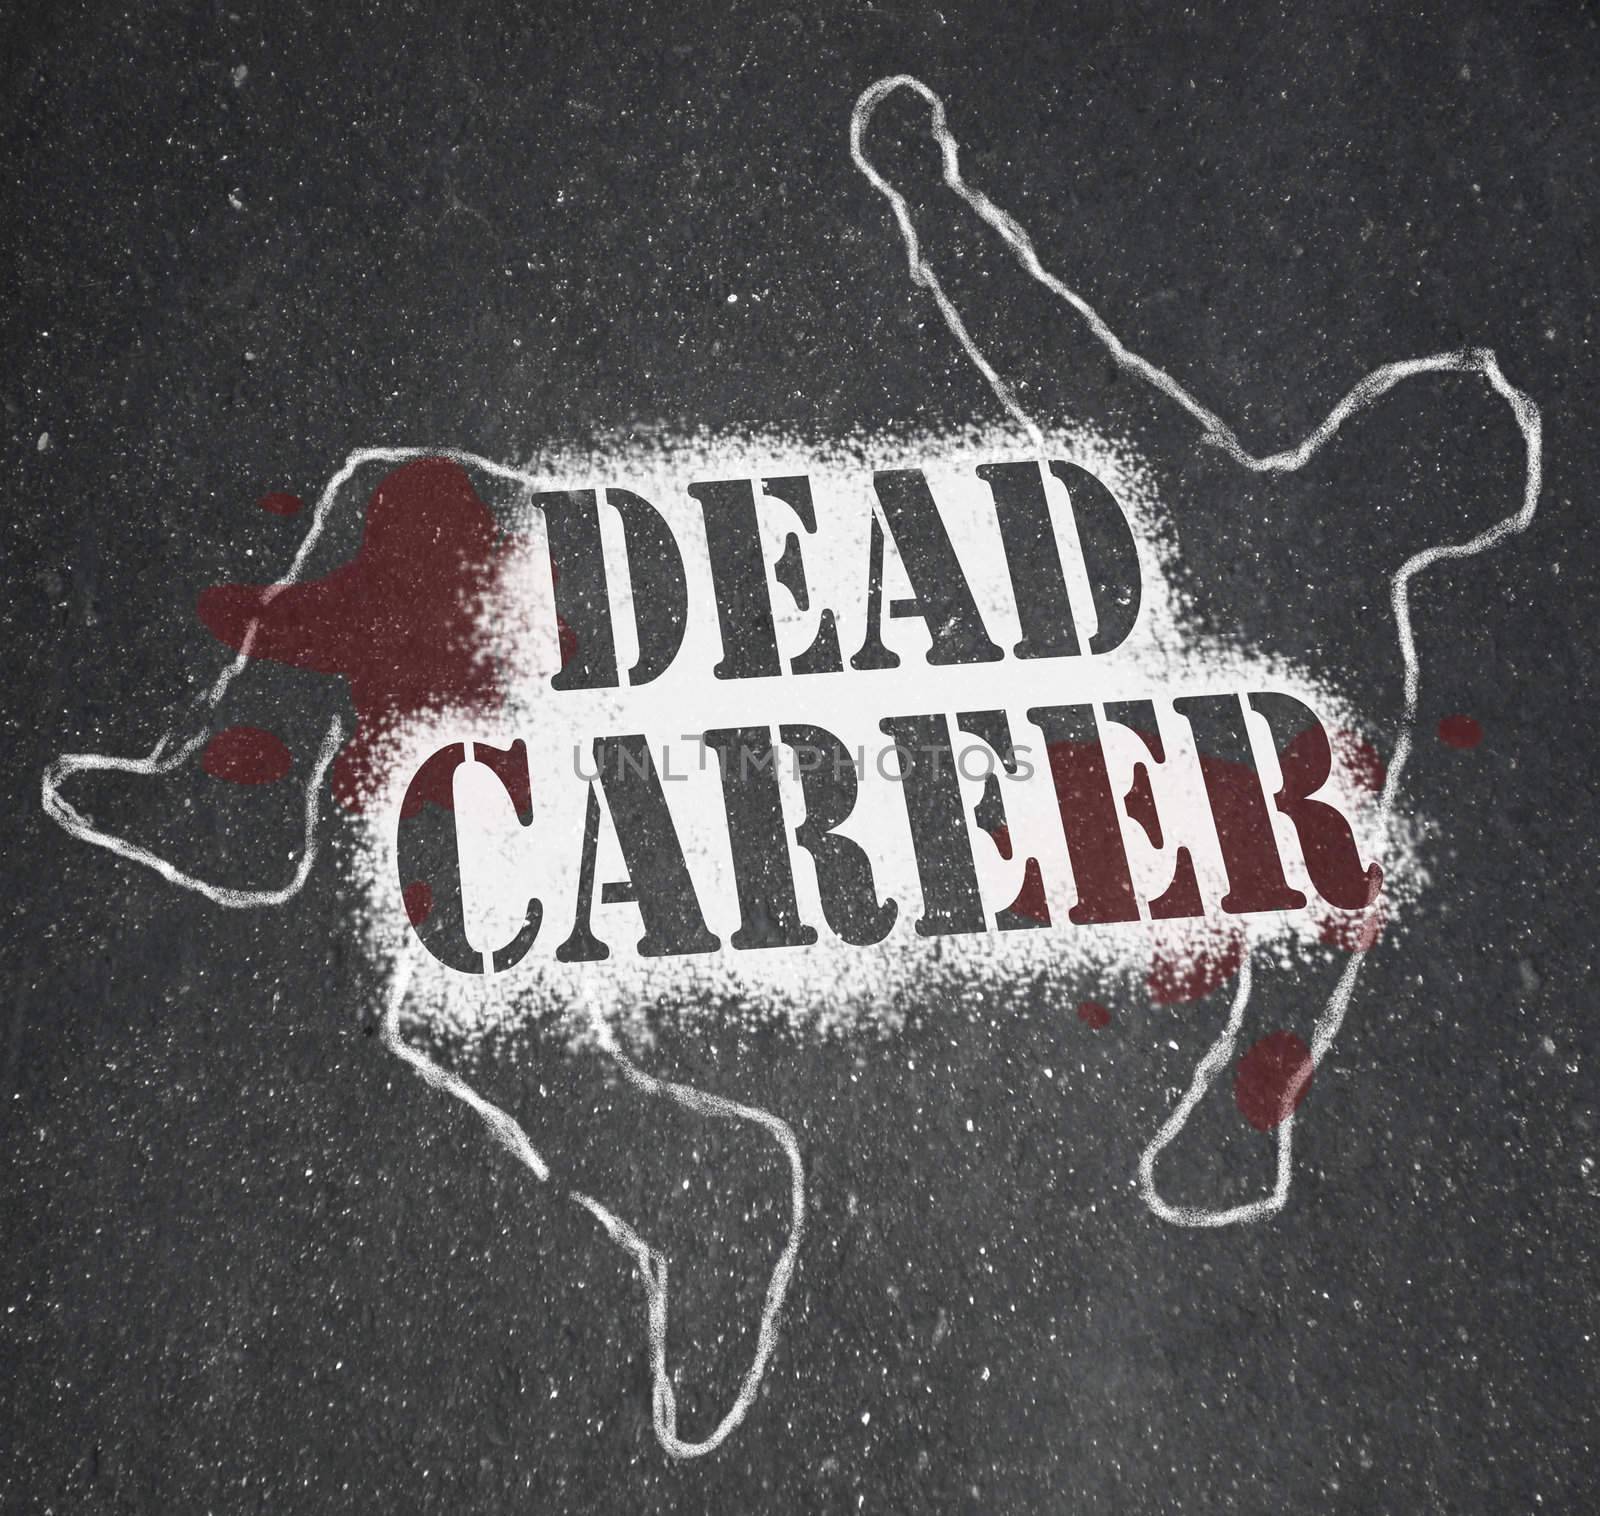 Dead Career - Chalk Outline of Obsolete or Demoted Position by iQoncept